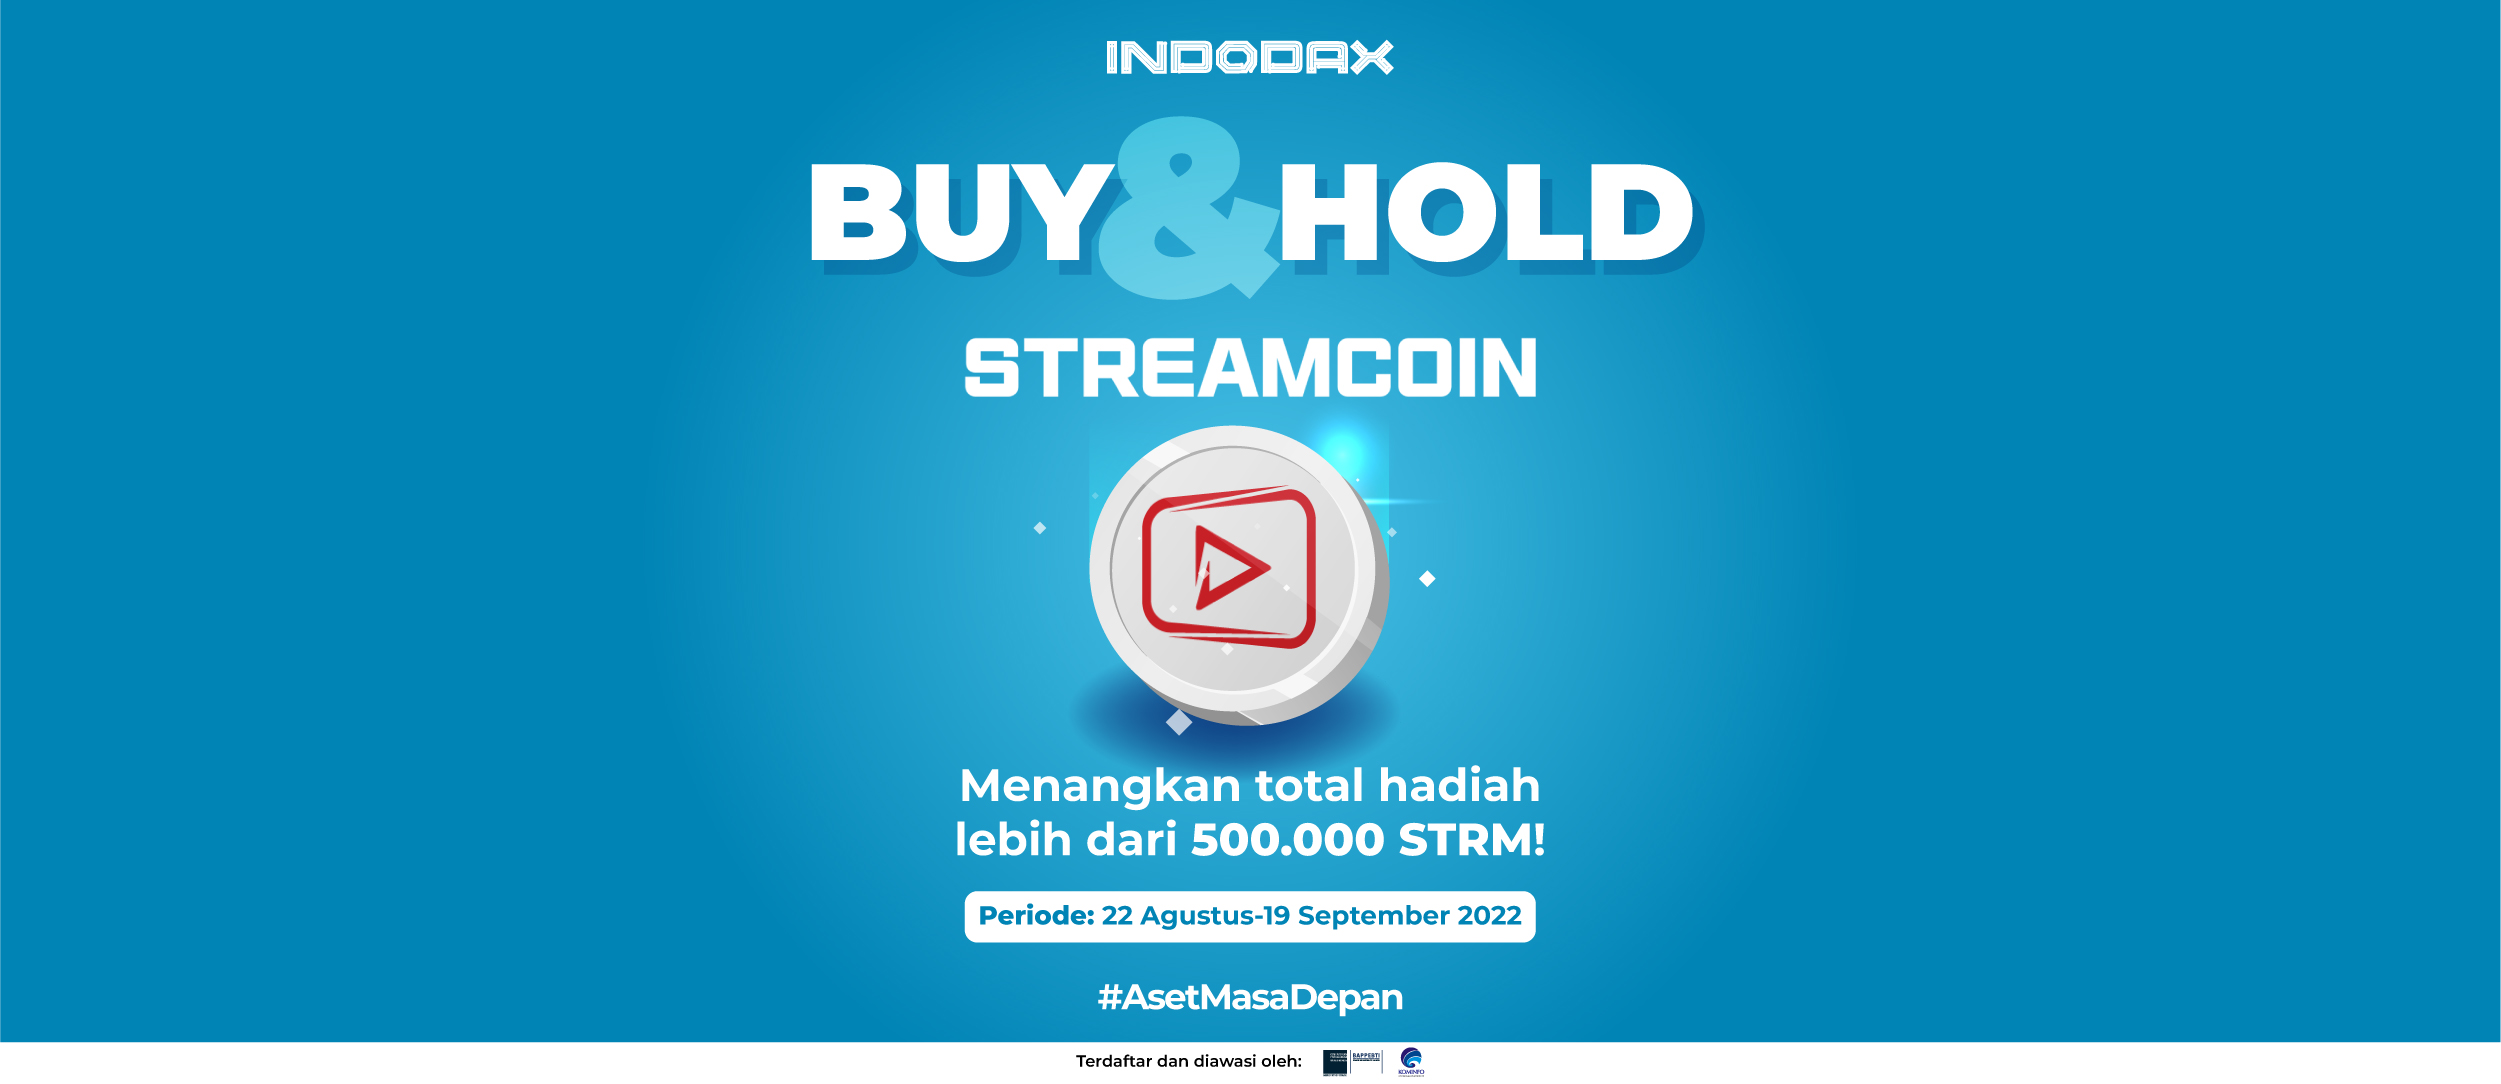 Buy & Hold StreamCoin